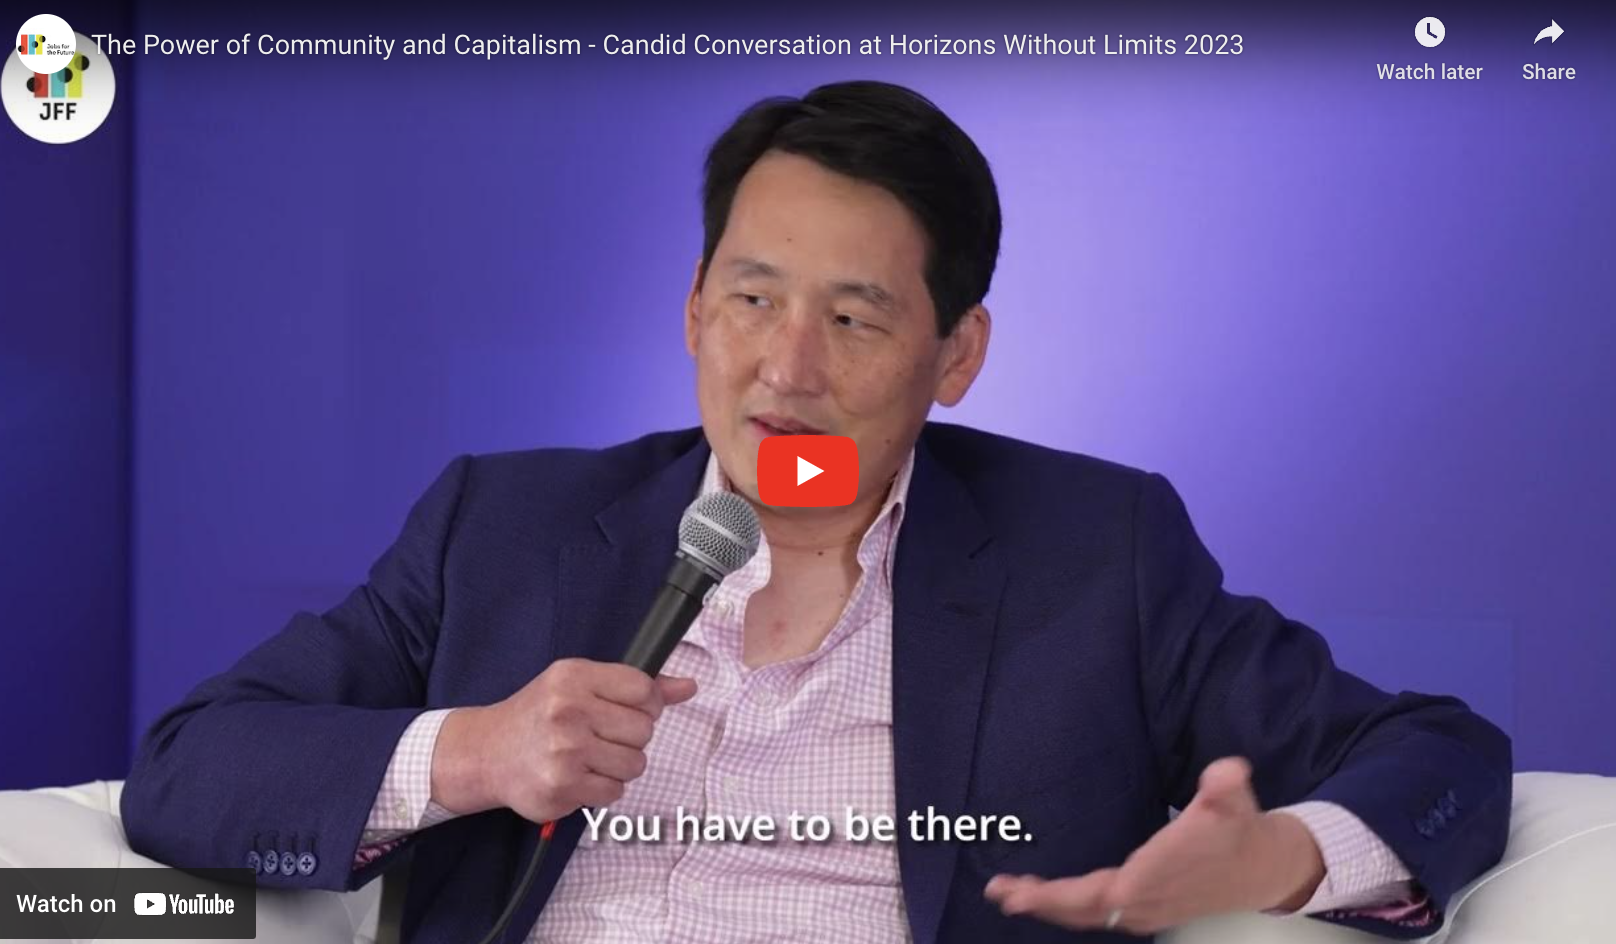 James Rhee, Founder, red helicopter and form CEO, Ashley Stewart and Saket Soni, Activist, Community Organizer, & Executive Director and Co-Founder, Resilience Force join together for a candid conversation